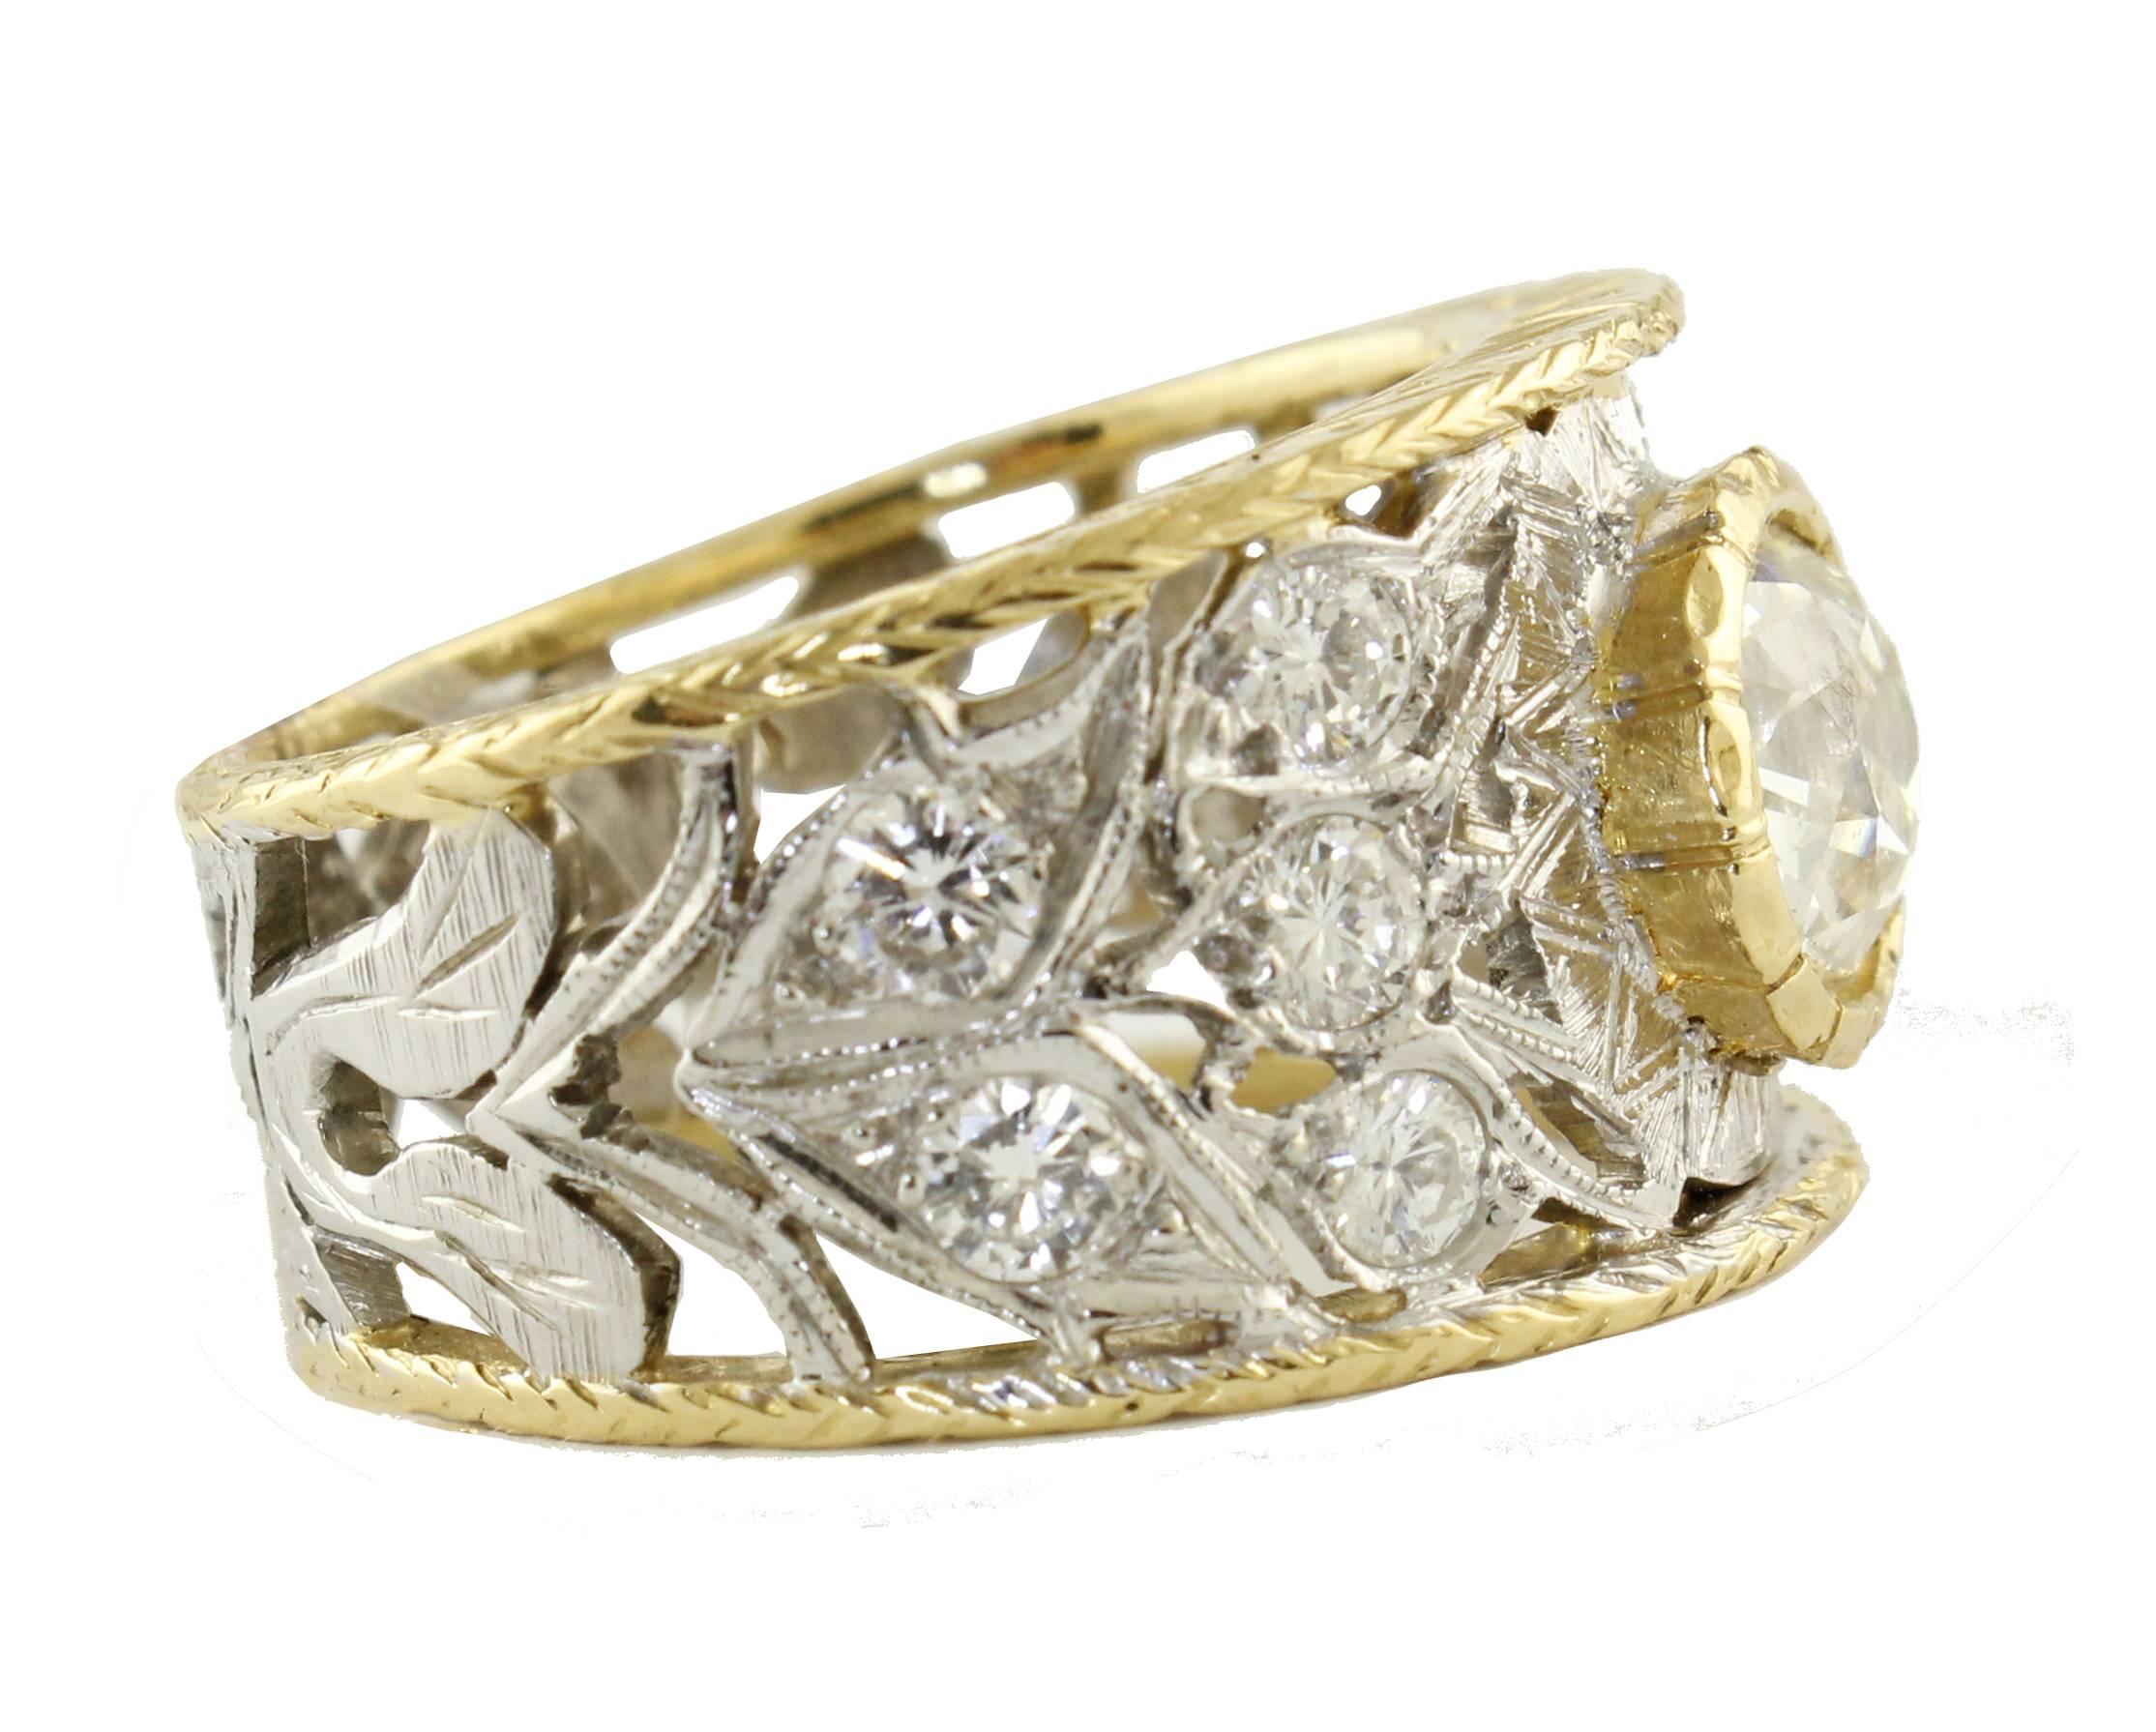 SHIPPING POLICY:
No additional costs will be added to this order.
Shipping costs will be totally covered by the seller (customs duties included).

Antique band ring in 18 kt white and yellow gold, filigree engraved and enriched with diamonds of ct